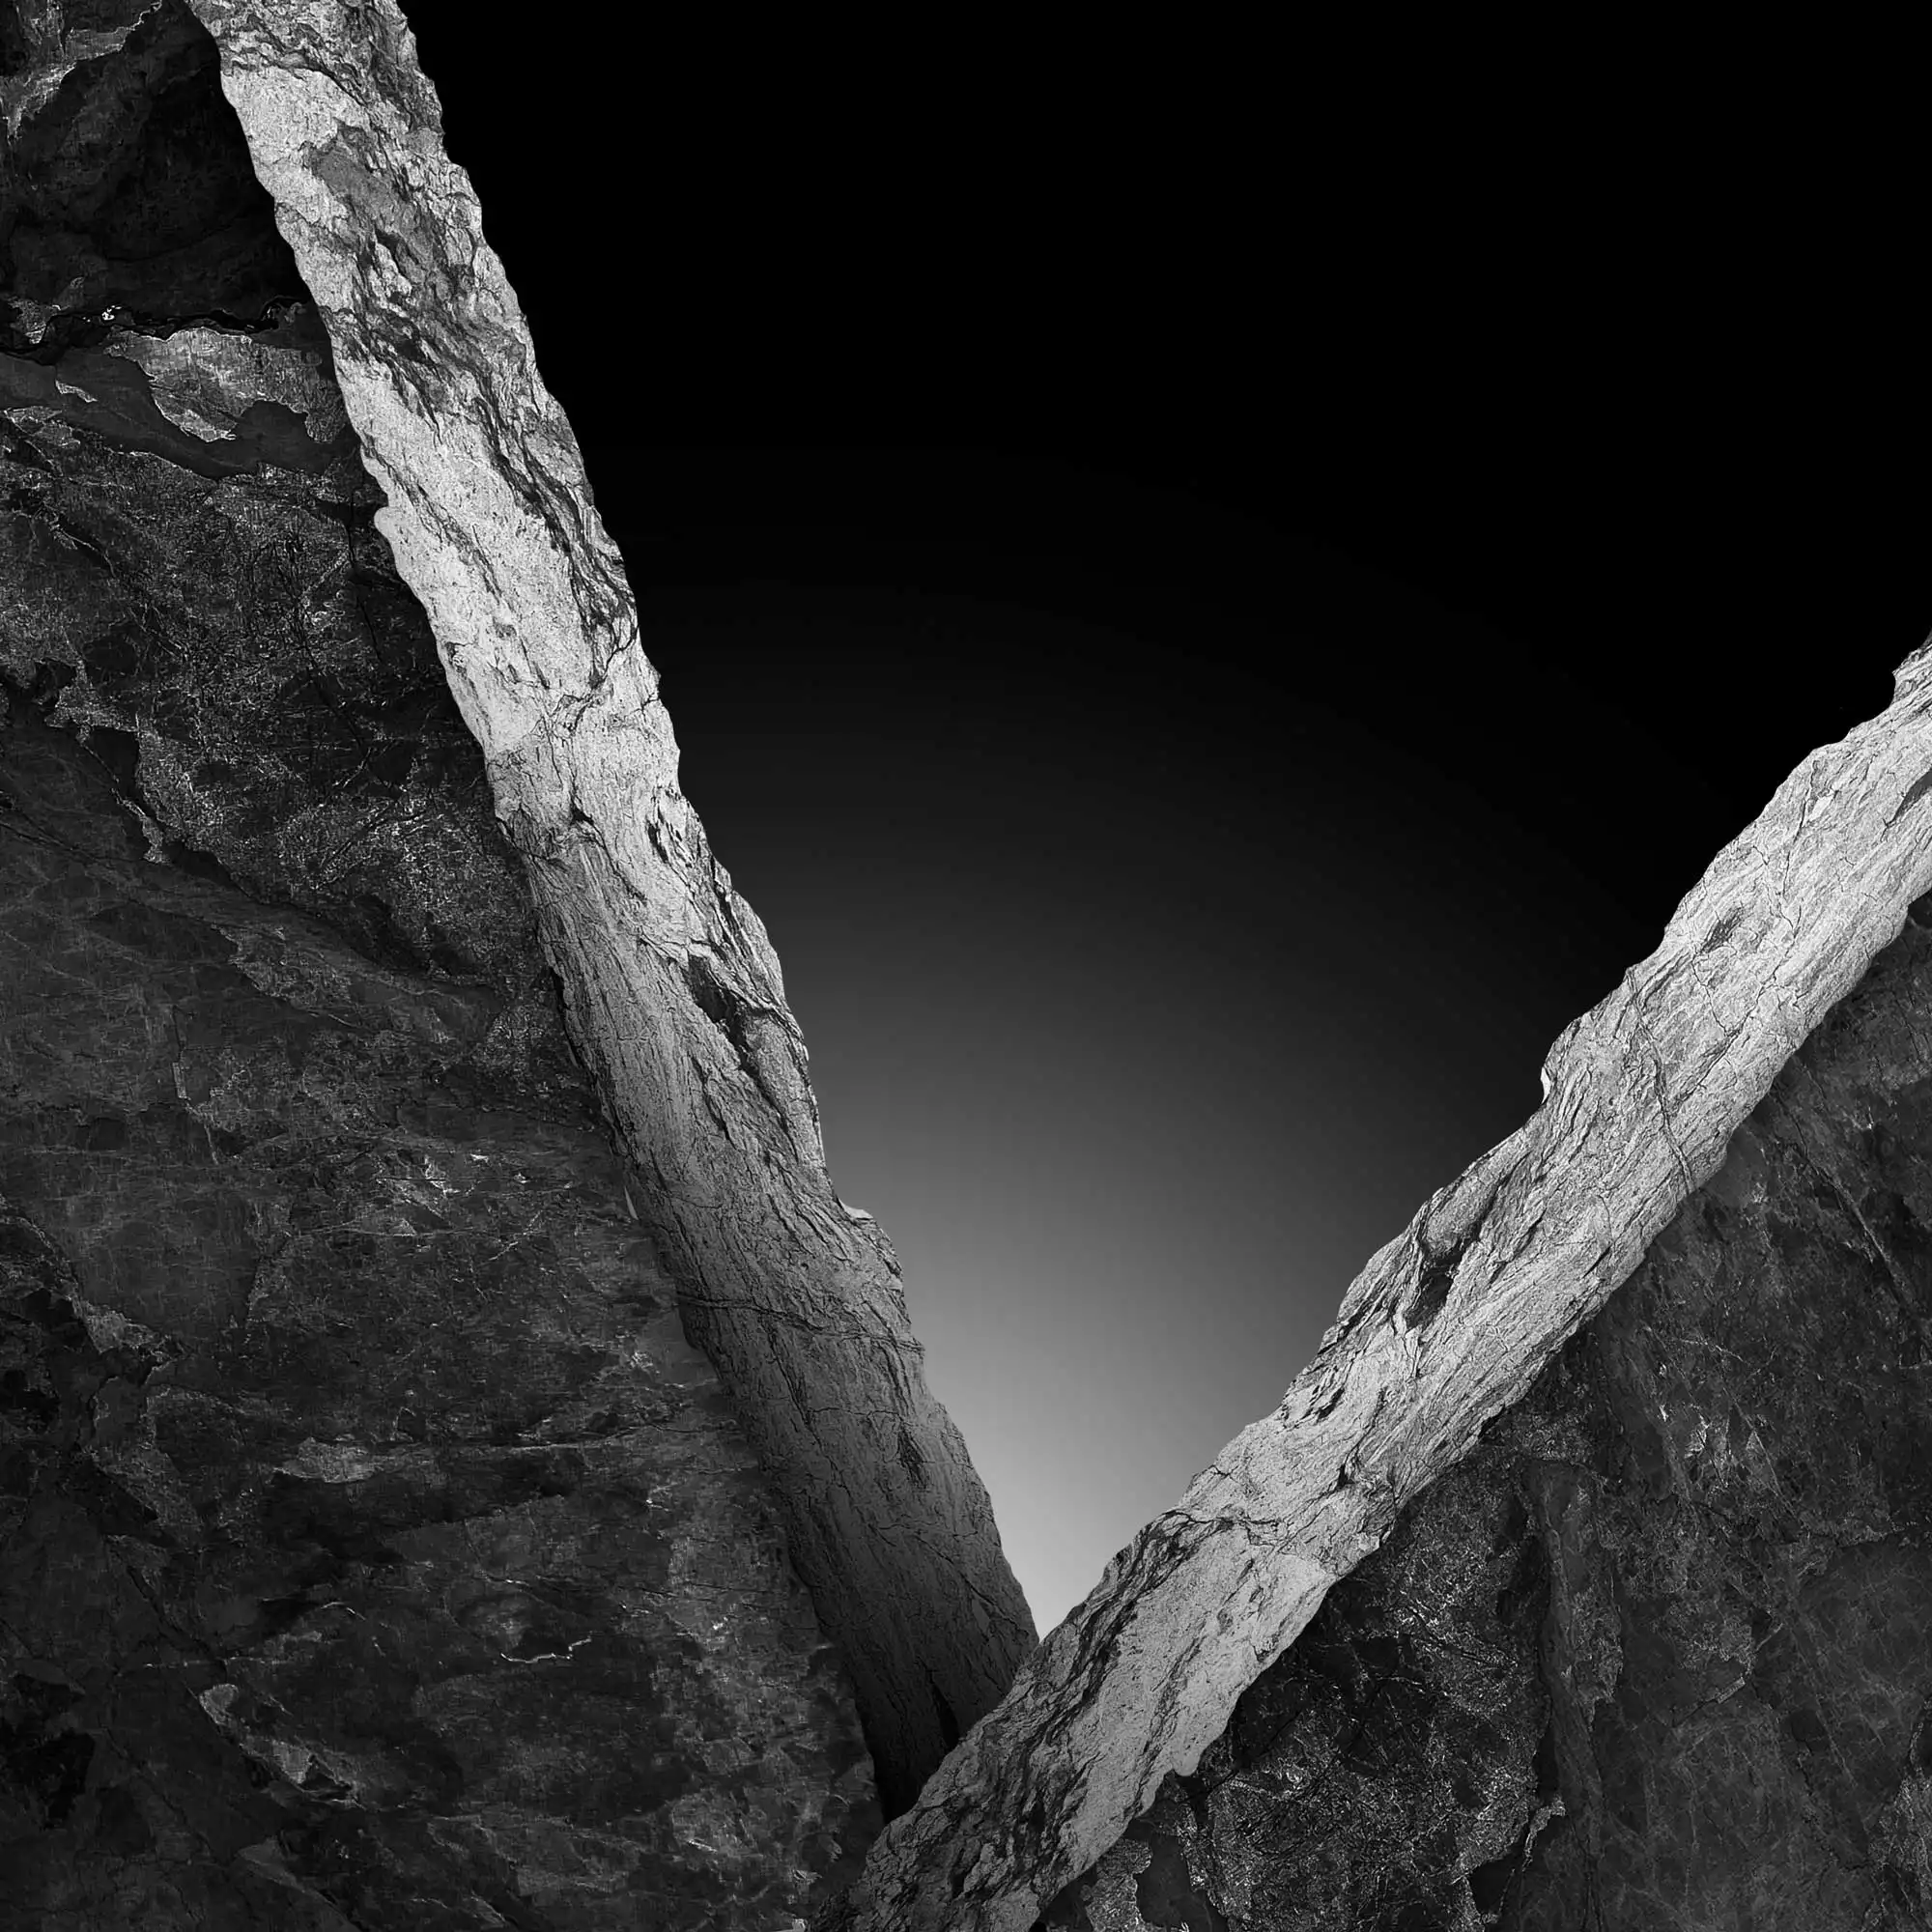 Abstract view of a stark rock crevice against a dark sky, with the contrasting textures and edges highlighted in a monochromatic tone.